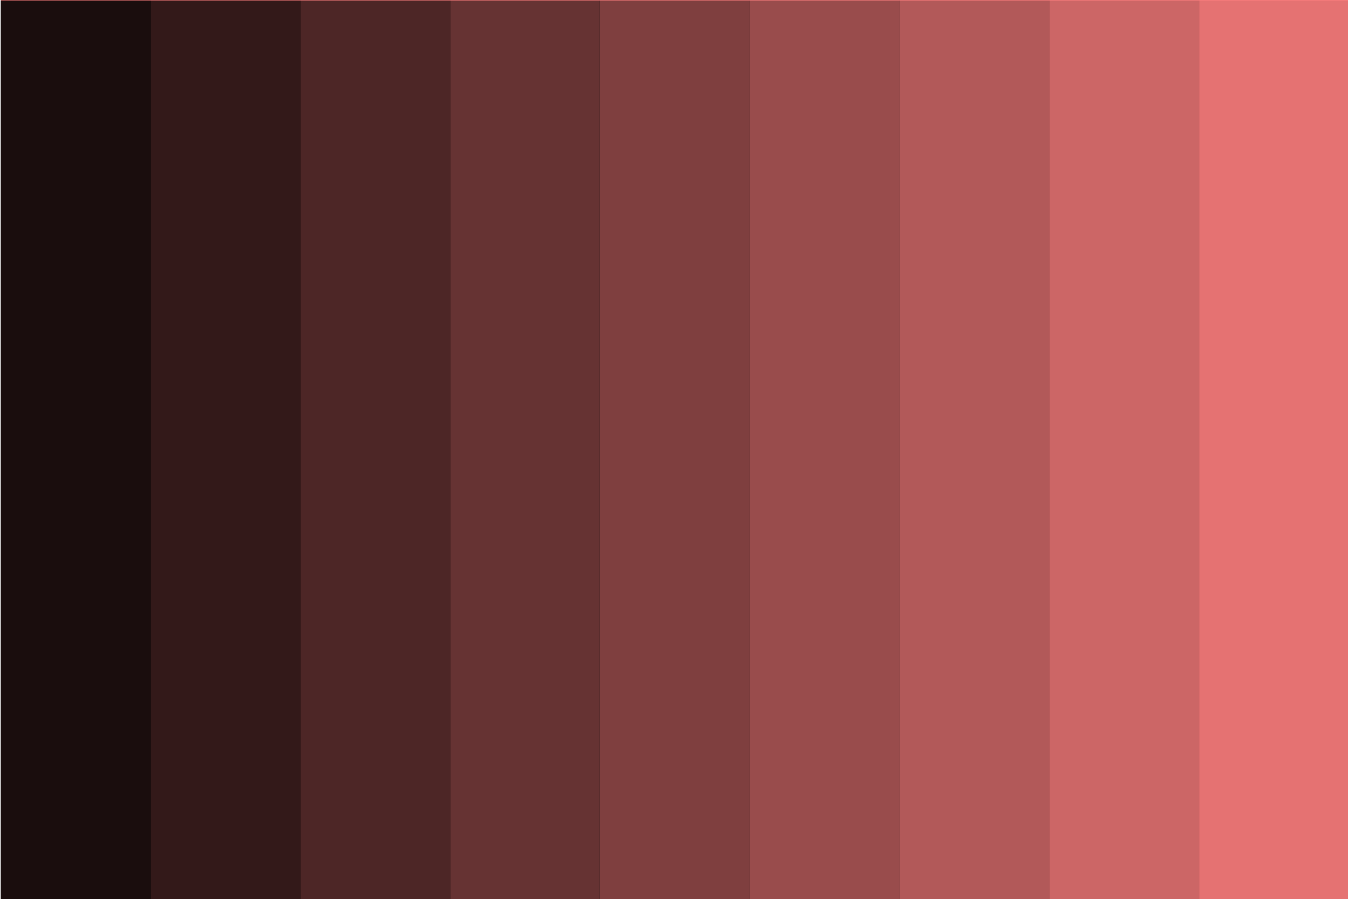 How Many Different Shades of Red Color are There?